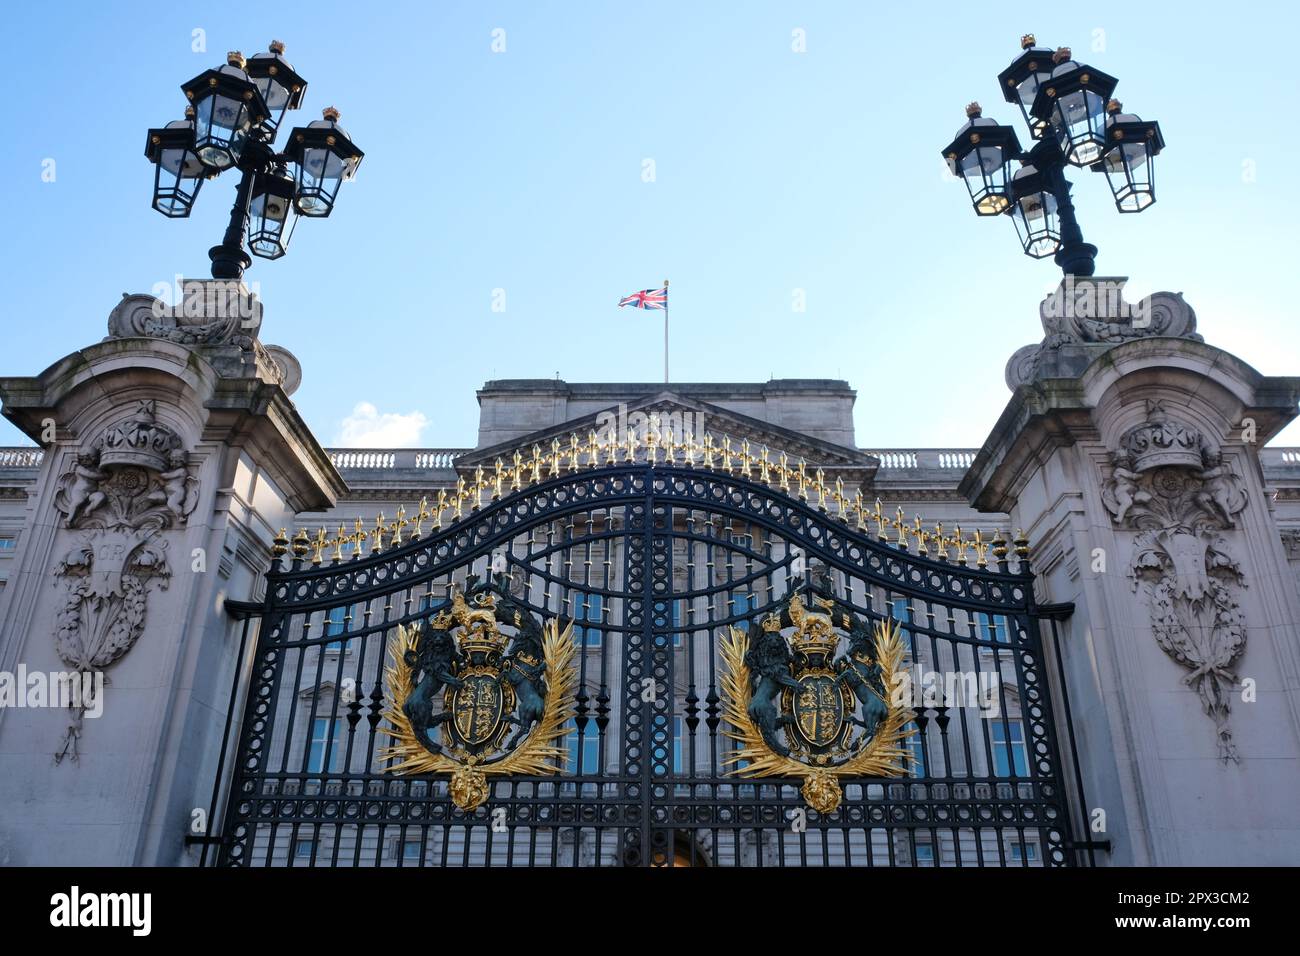 London, UK. The stonework and gates of Buckingham Palace receive a clean and refresh ahead of the the King's Coronation on May 6th Stock Photo